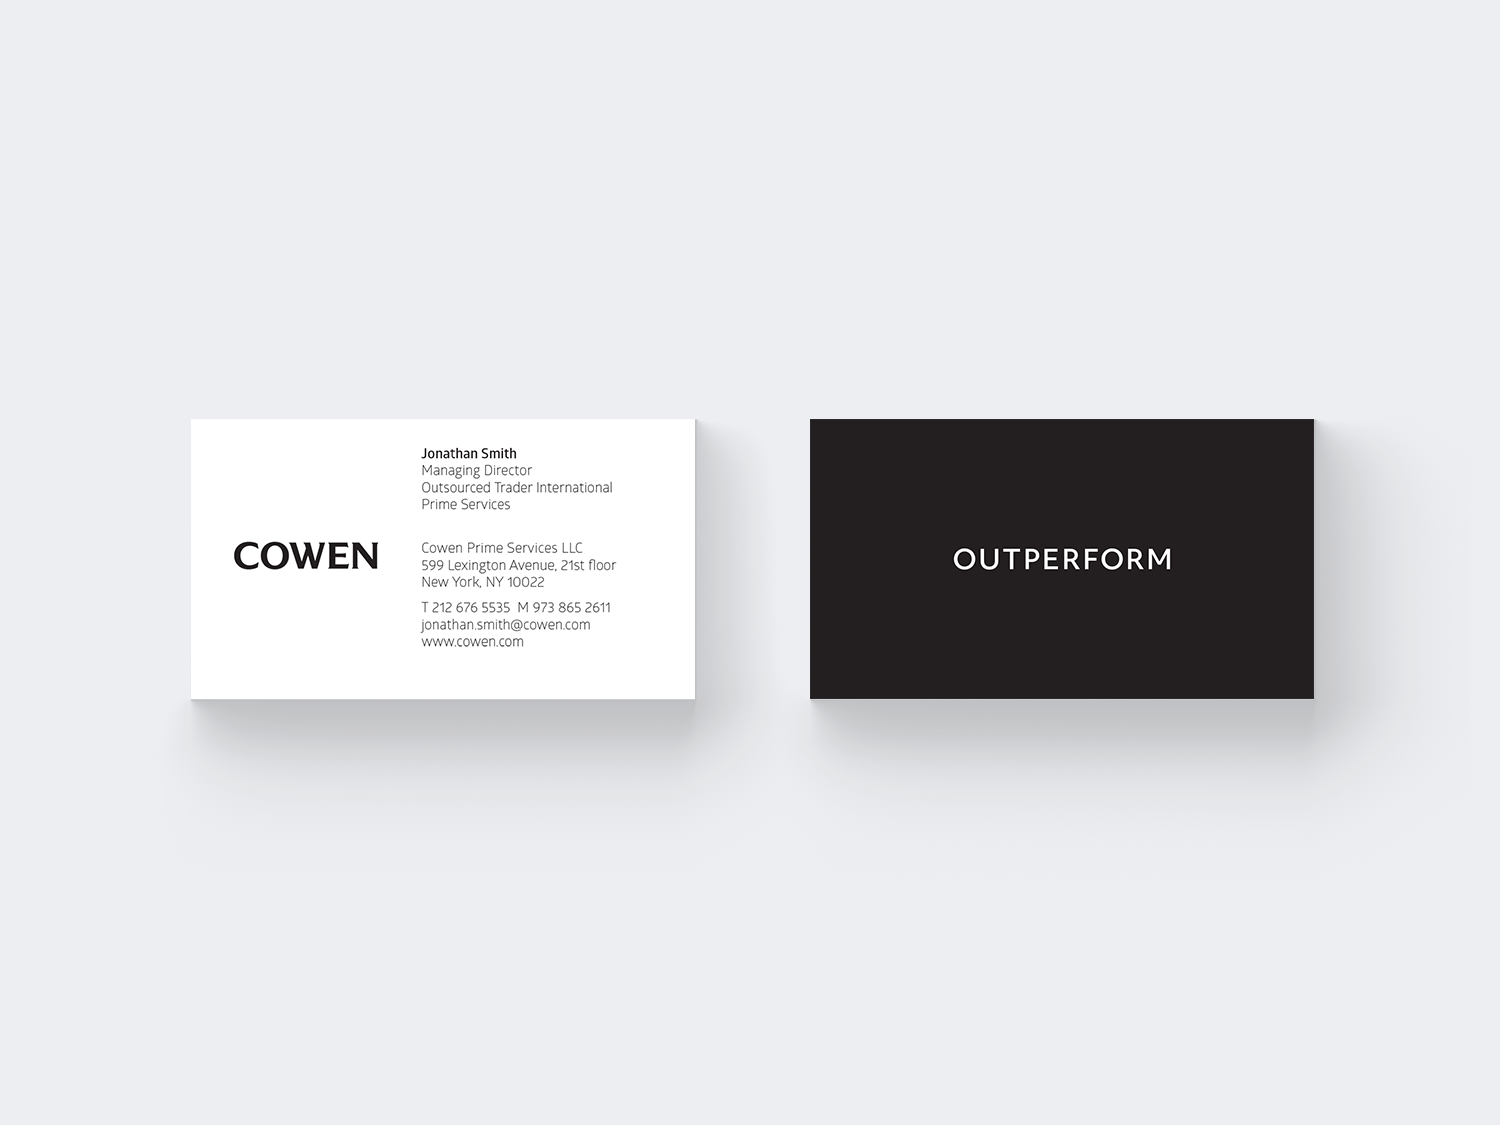 Cowen business card front and back (with Outperform tagline)